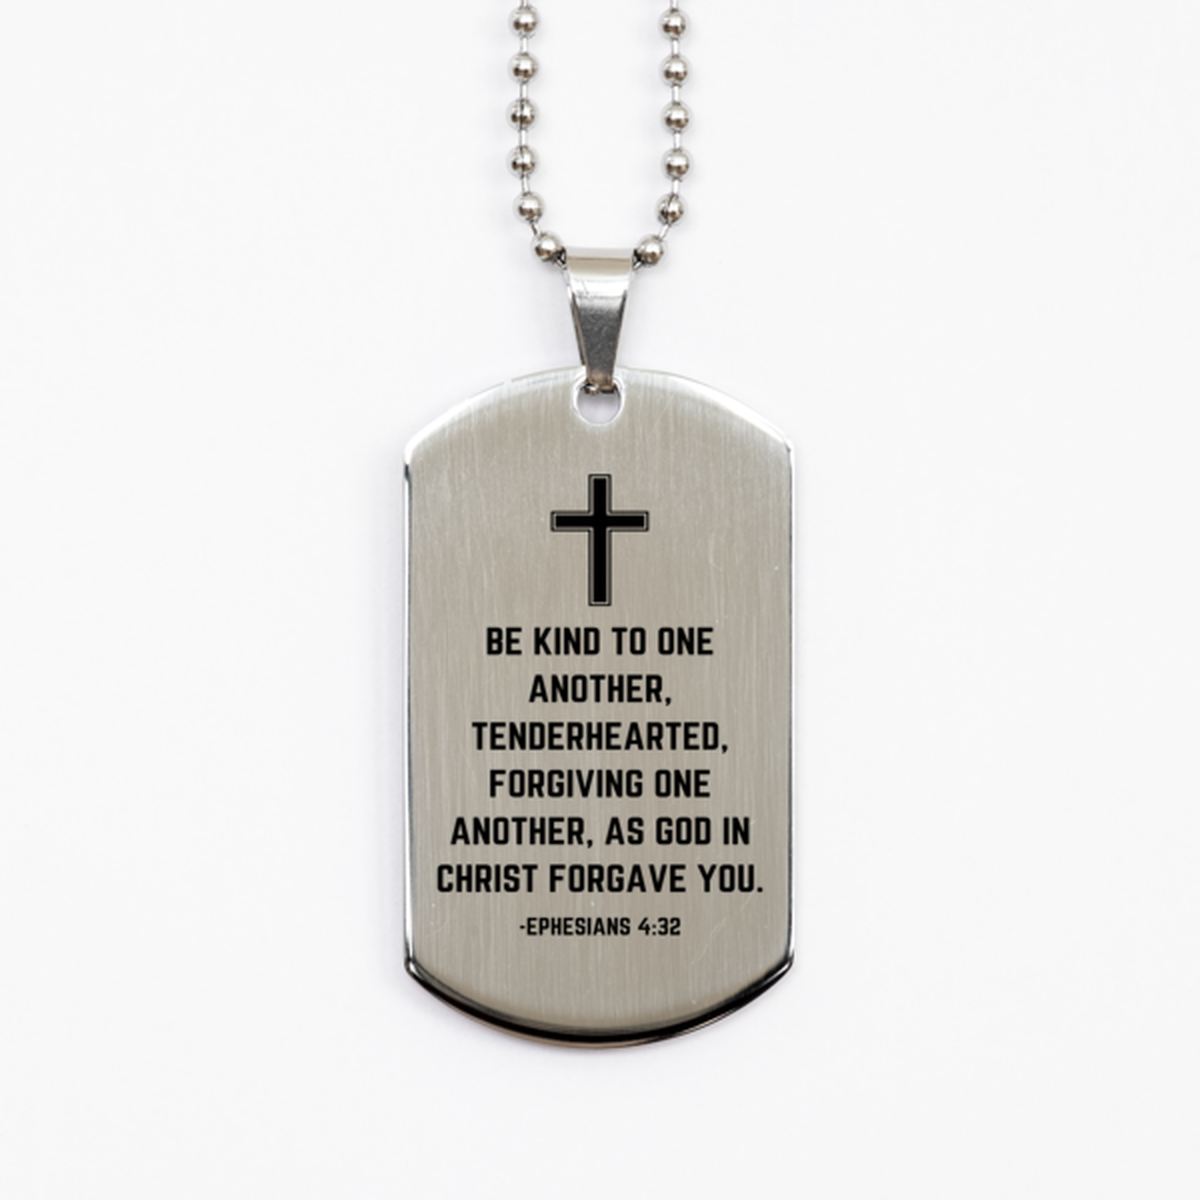 Baptism Gifts For Teenage Boys Girls, Christian Bible Verse Silver Dog Tag, Be kind to one another, Confirmation Gifts, Bible Verse Necklace for Son, Godson, Grandson, Nephew